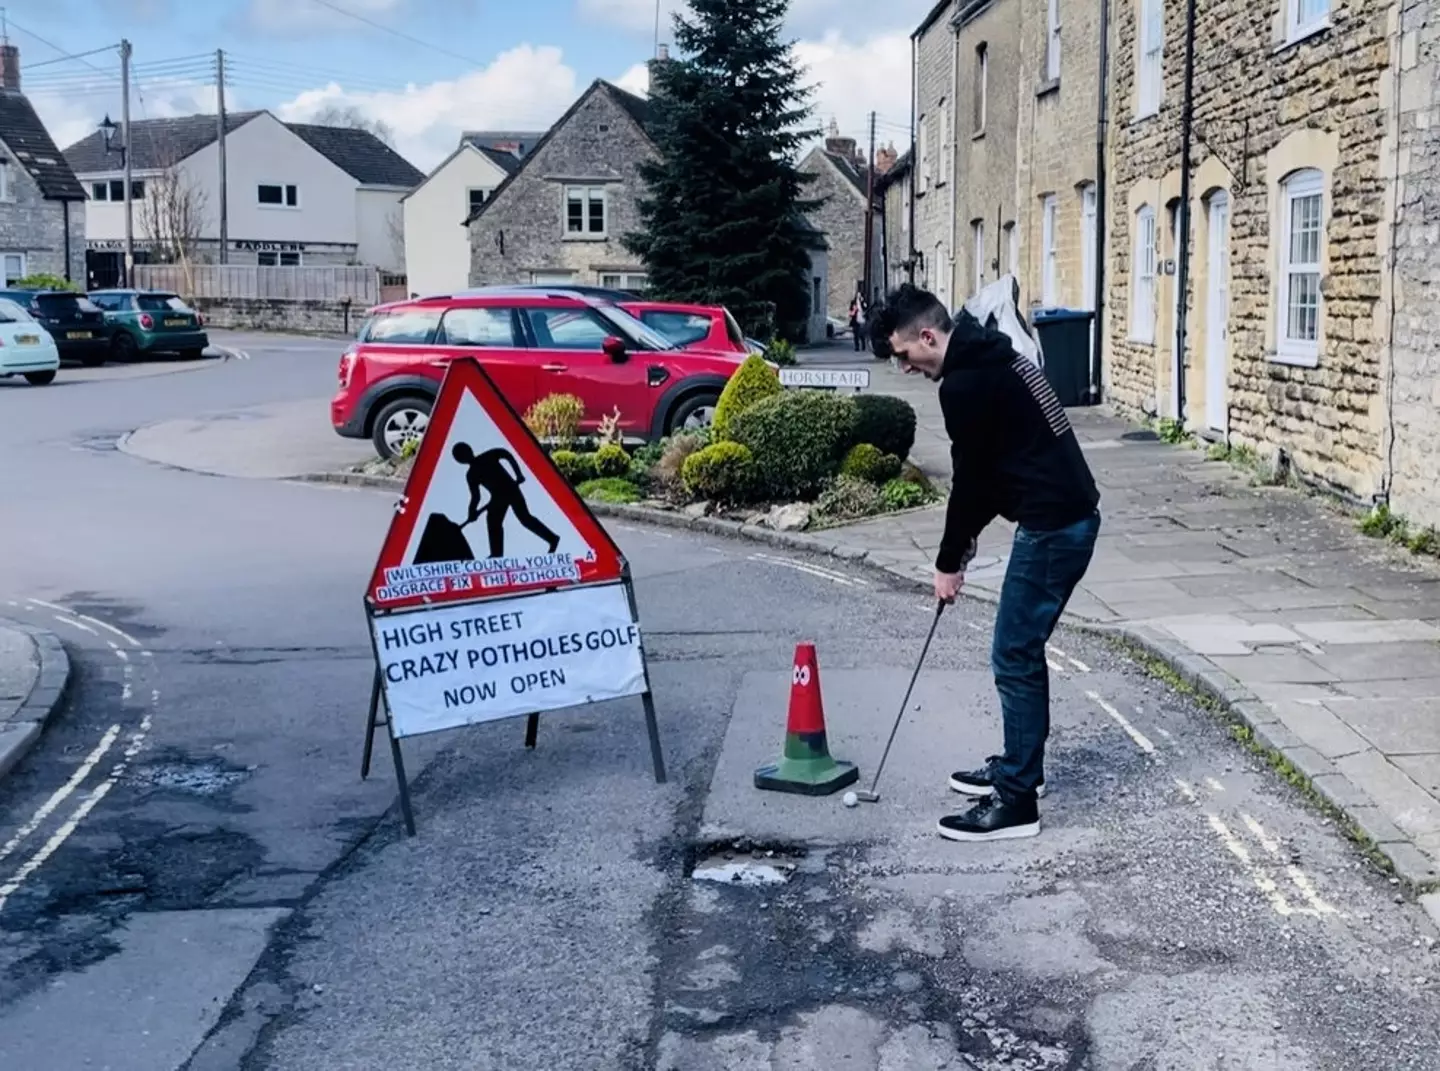 This lad decided to take the pothole issue into his own hands by turning them into a crazy golf course.